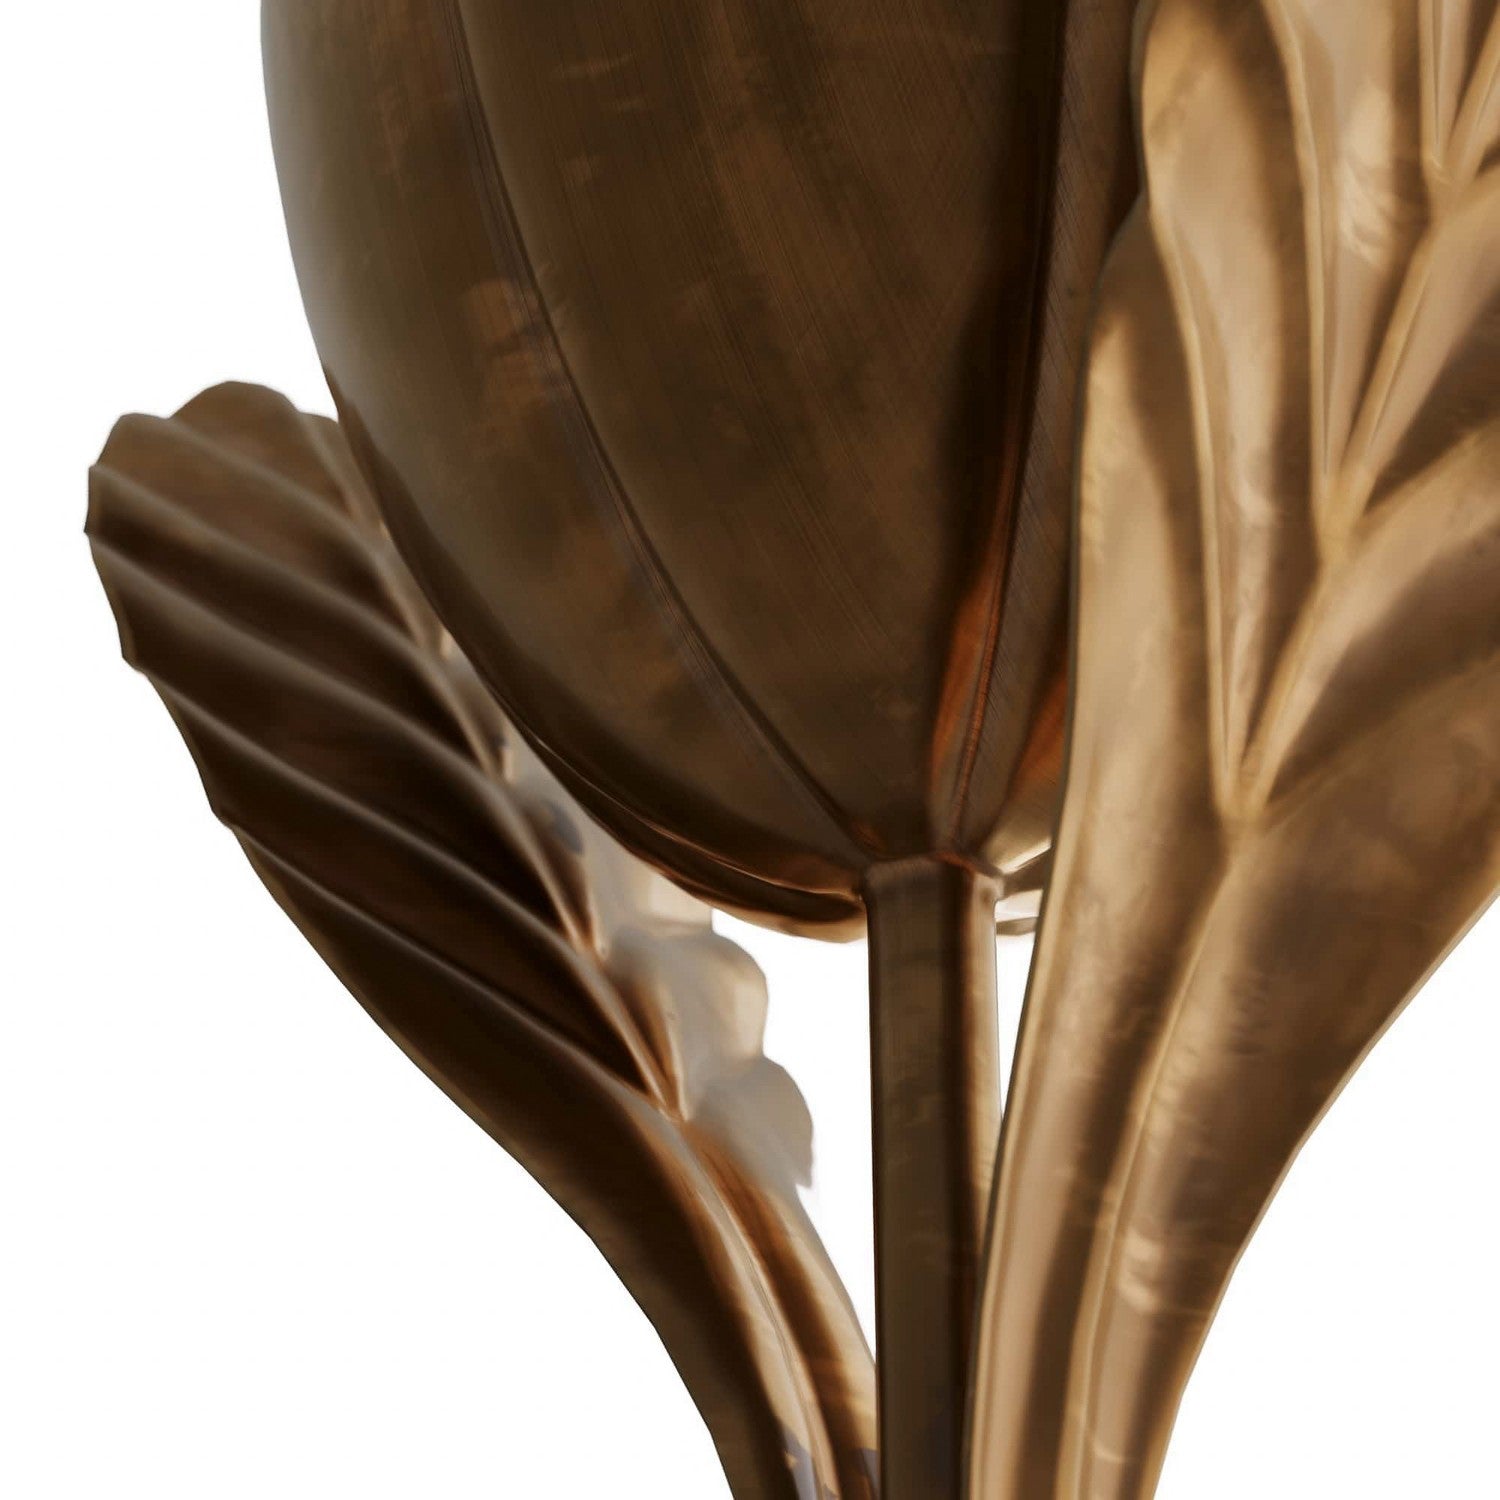 Sculpture from the Pitaya collection in Vintage Brass finish